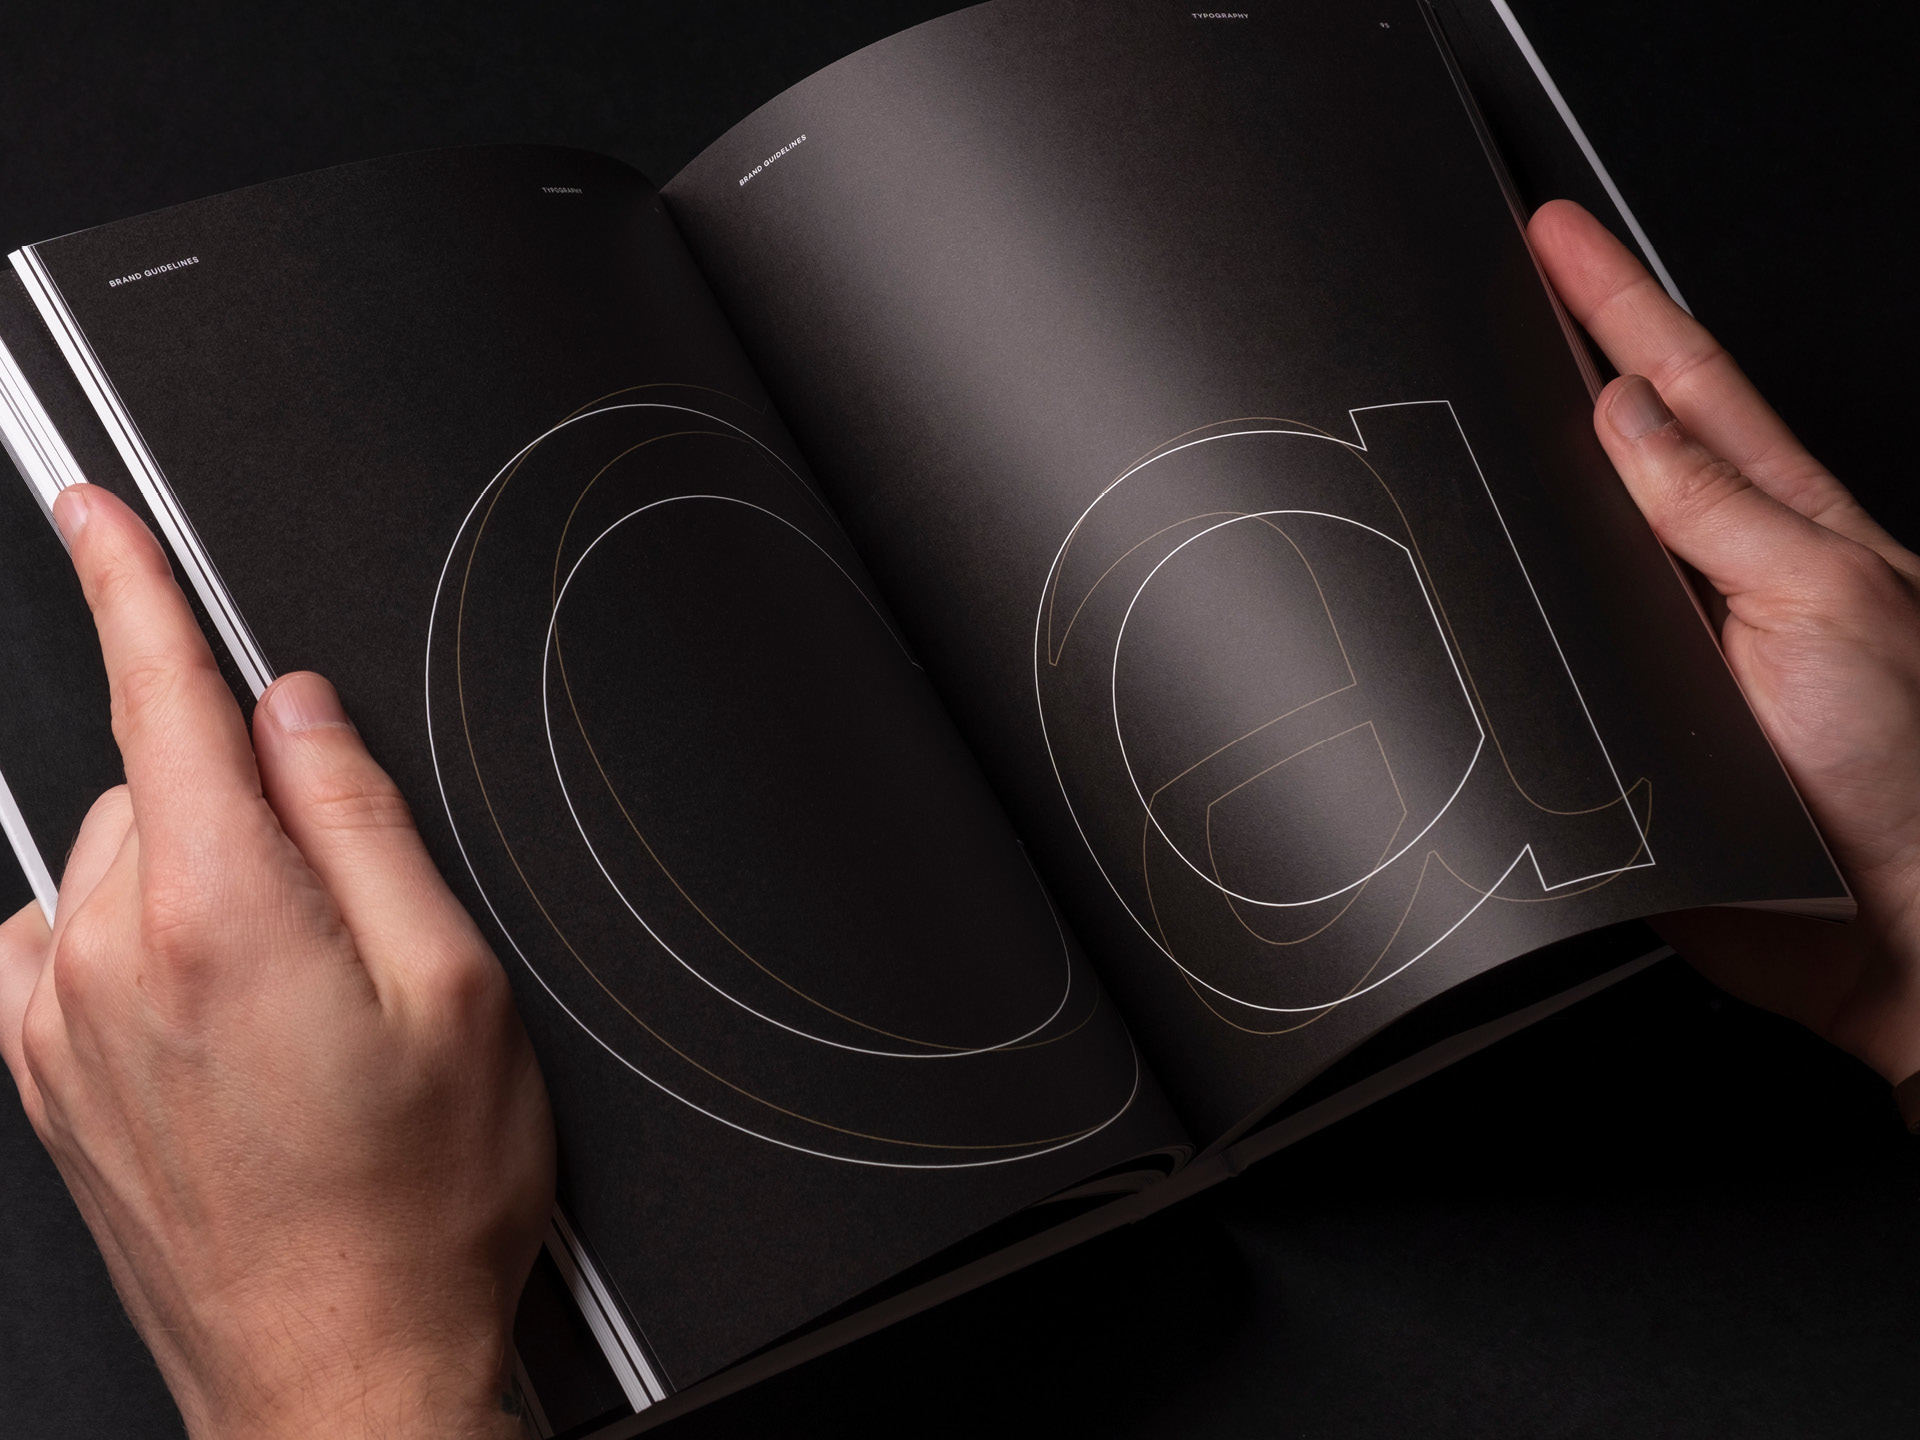 A printed spread from the Carlauren guidelines detailing the overlapping characters of the two brand typefaces